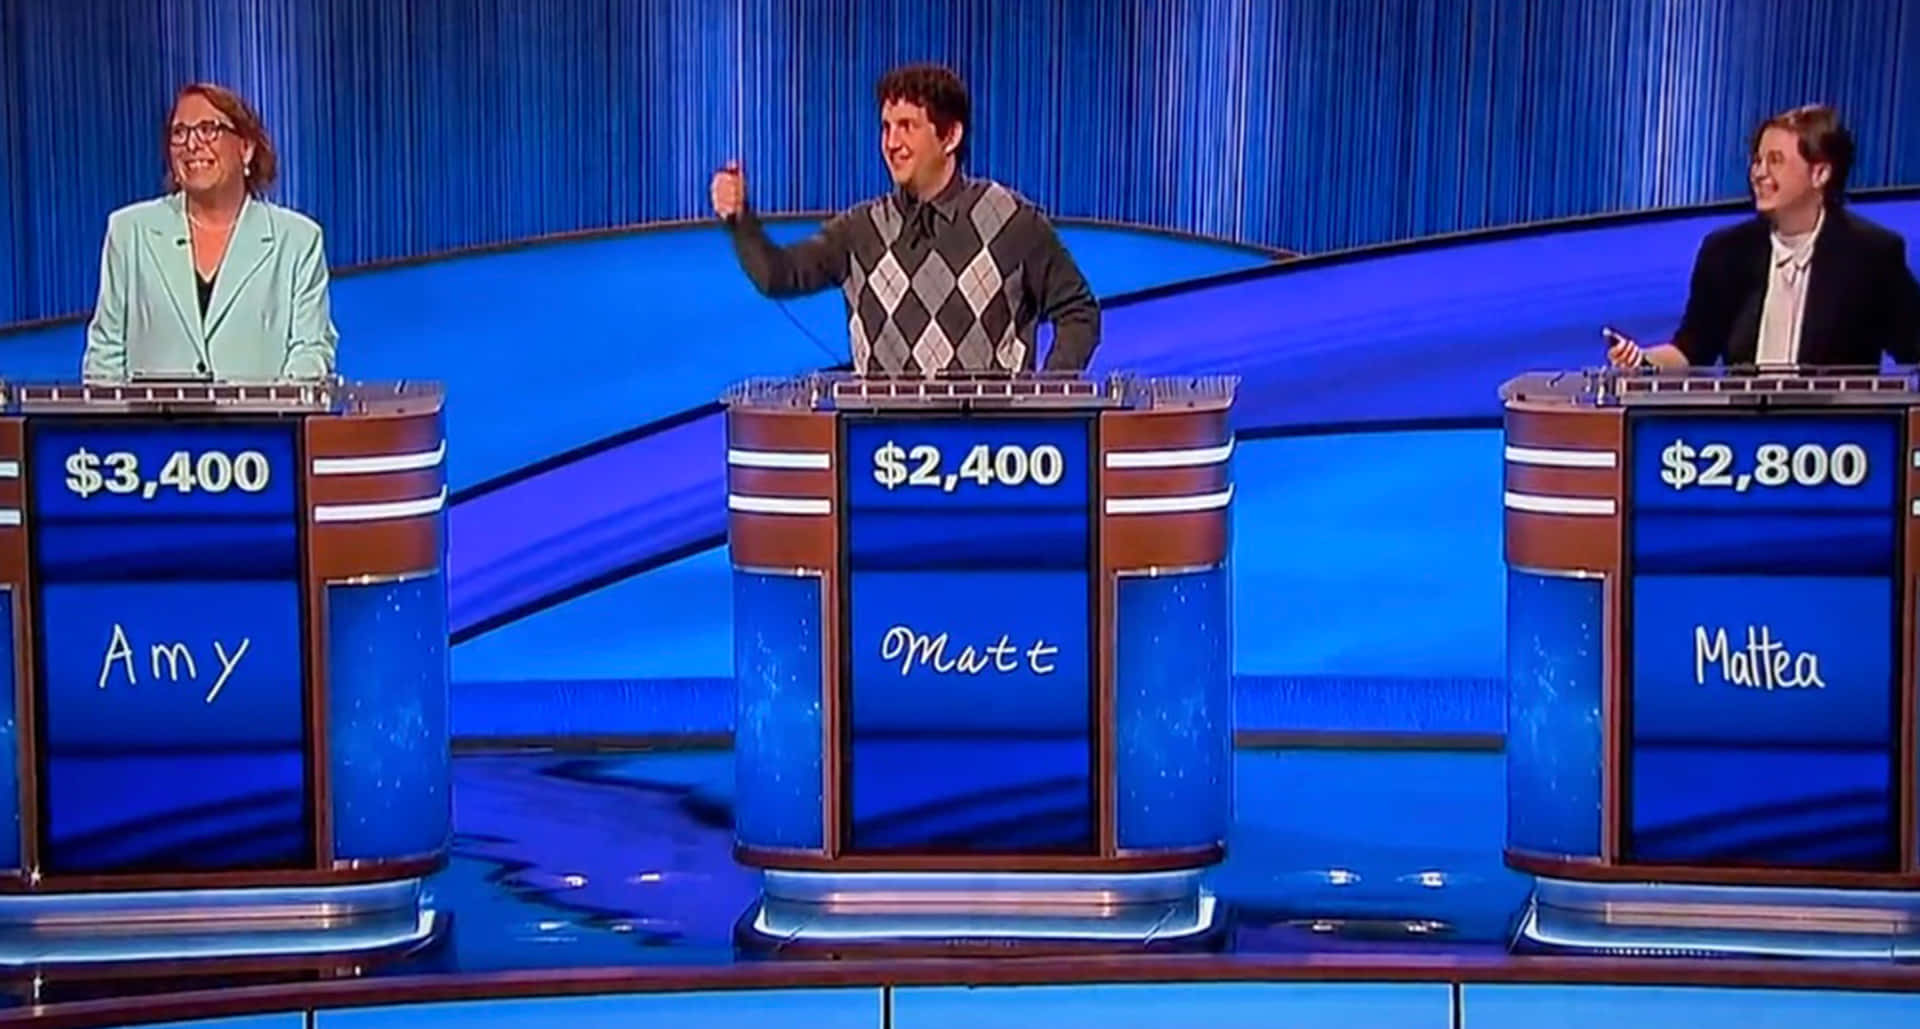 "Are you ready to play Jeopardy?"